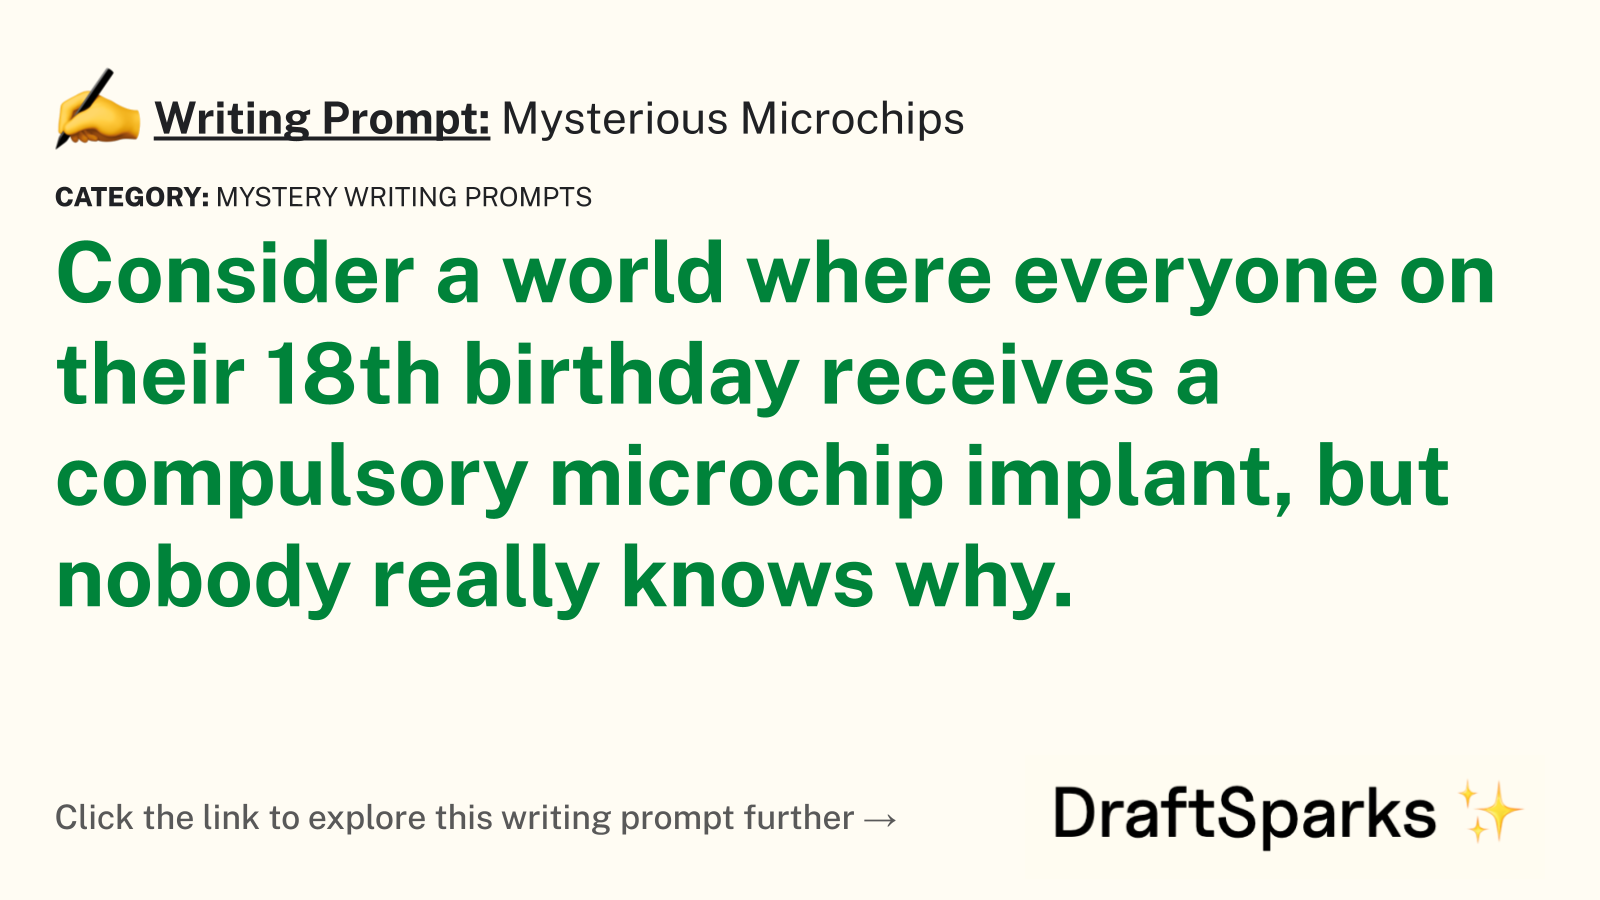 Mysterious Microchips